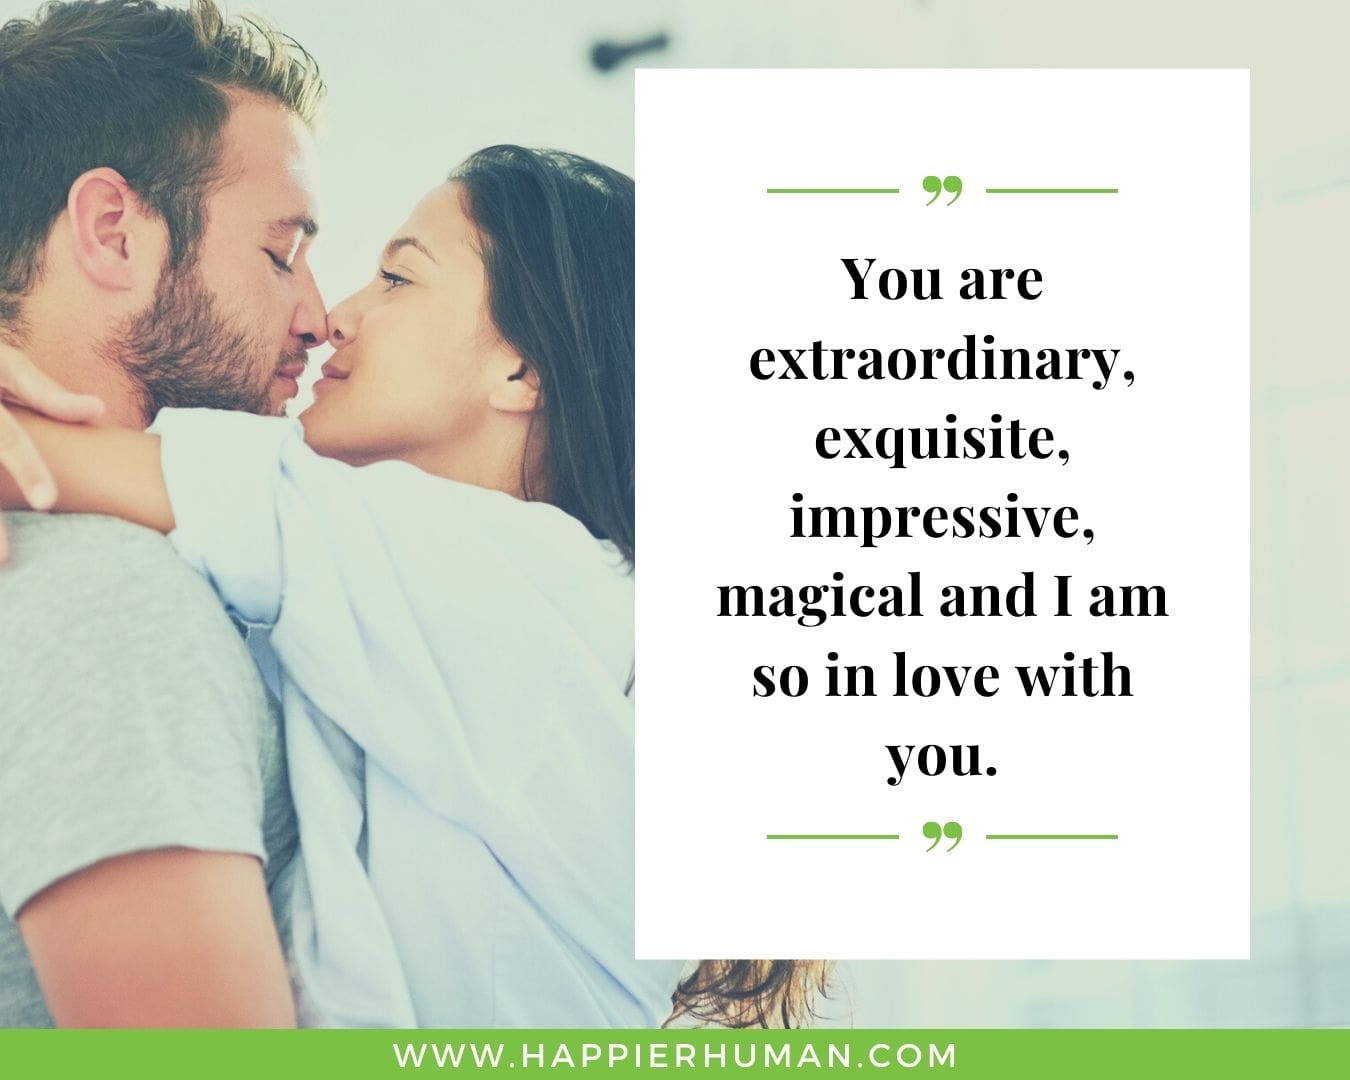 Sweet and Romantic Love Quotes for Her - “You are extraordinary, exquisite, impressive, magical and I am so in love with you.”